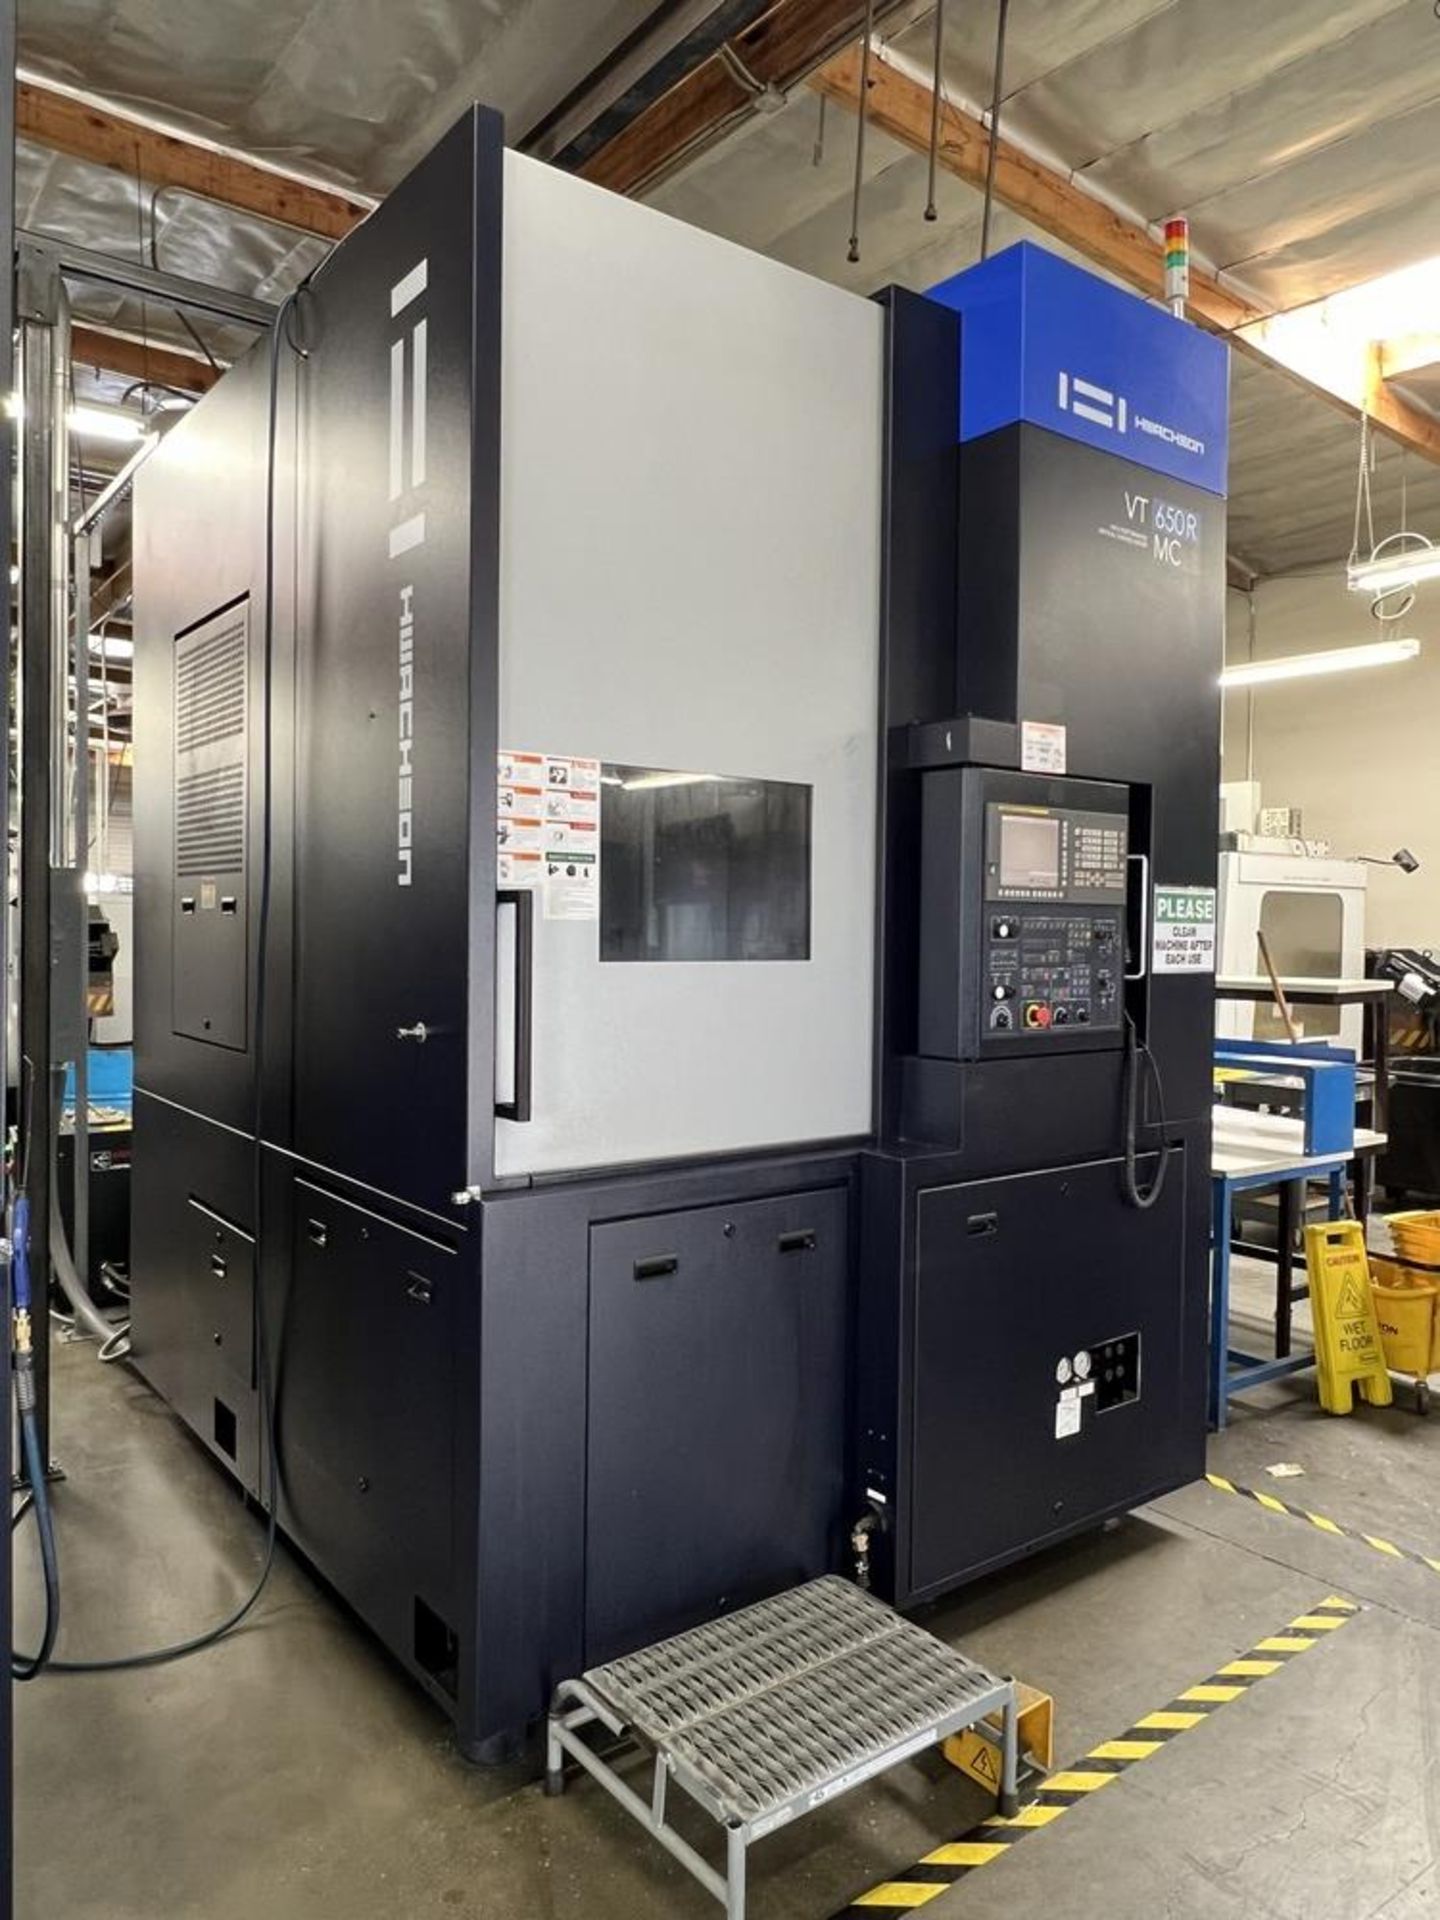 2020 Hwacheon VT-650R MC, 1500 RPM, 24" Chuck, 12 Station Turret, Live Milling, 35" Max Swing, - Image 2 of 32